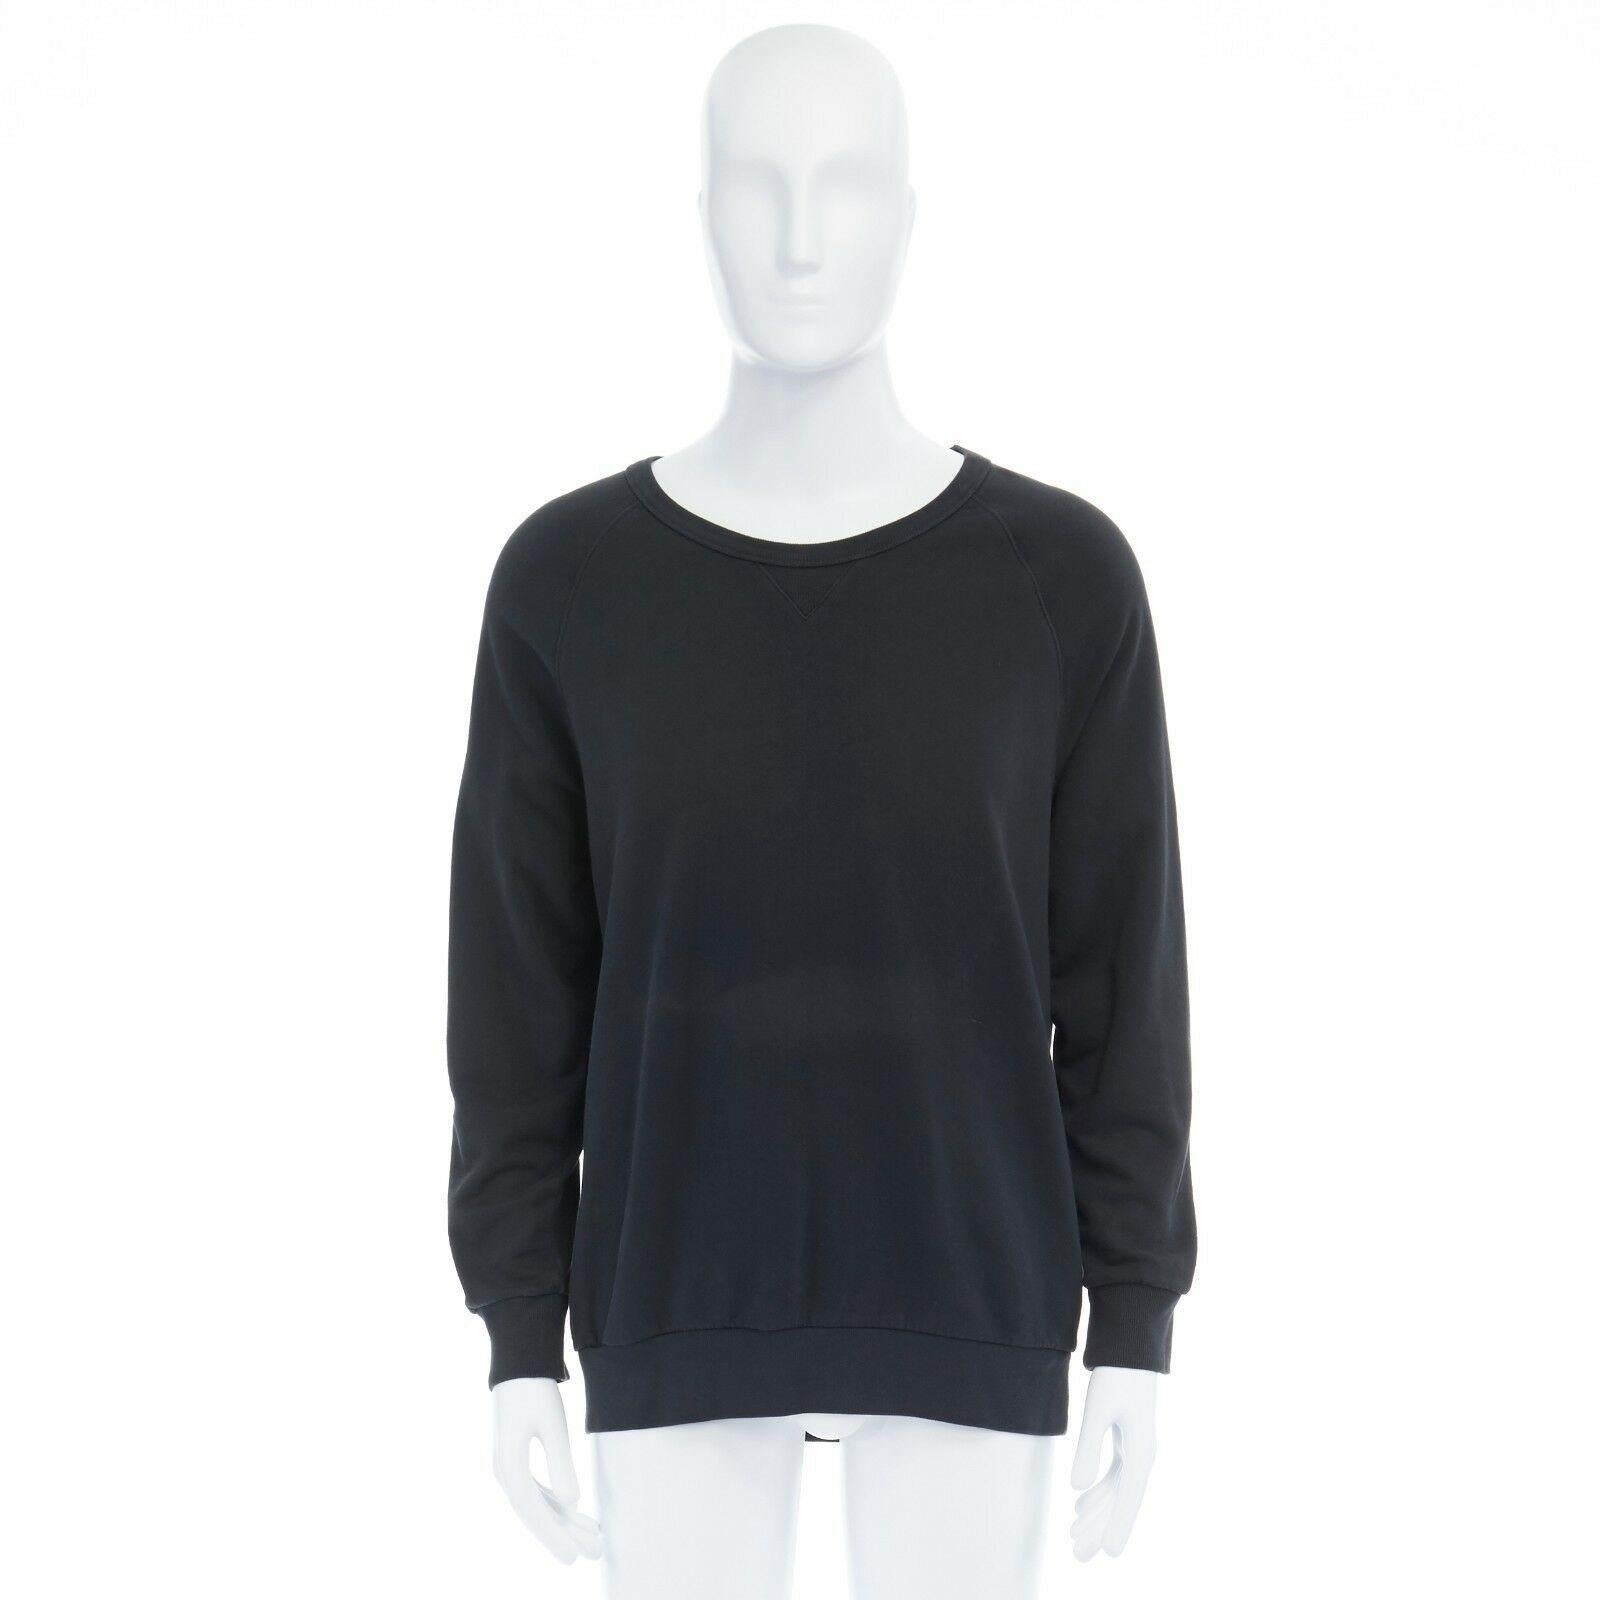 DRIES VAN NOTEN  black cotton zip back quilted lining sweater pullover top L

DRIES VAN NOTEN
Cotton, polyester, silk. Black. Crew neck. Long sleeve. Silver-tone zip back detail. Purple quilted fabric lining. Oversized fit. Made in